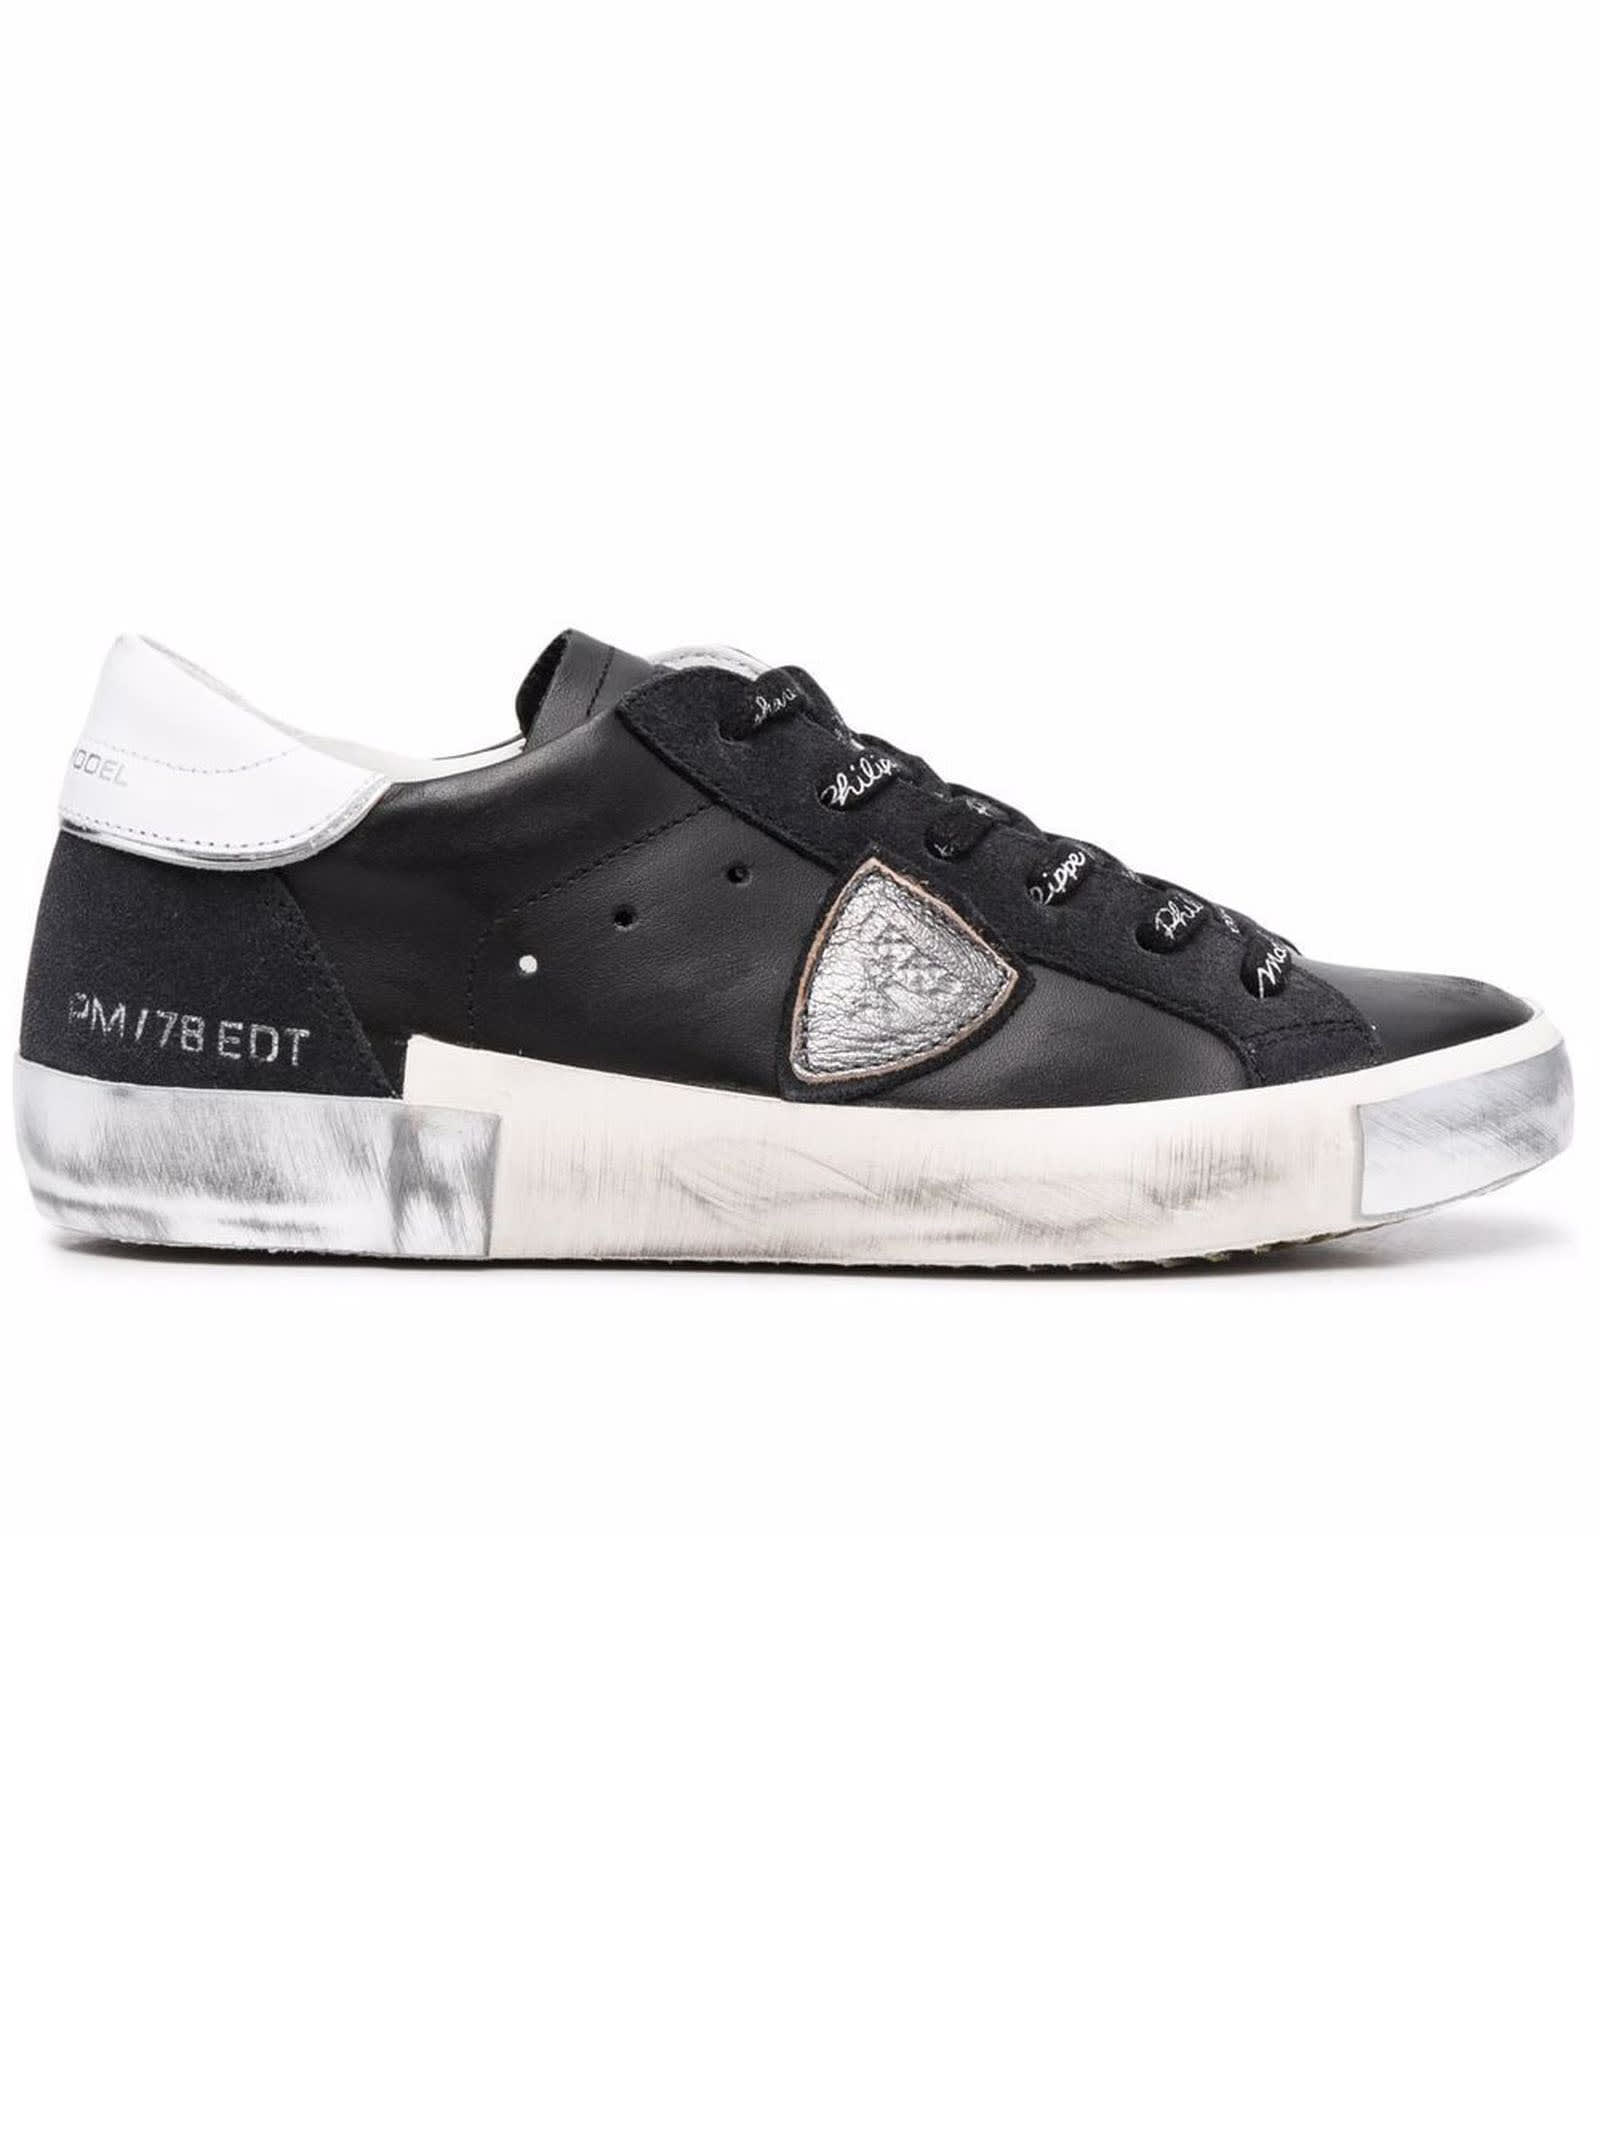 Philippe Model Black Leather Prsx Sneakers